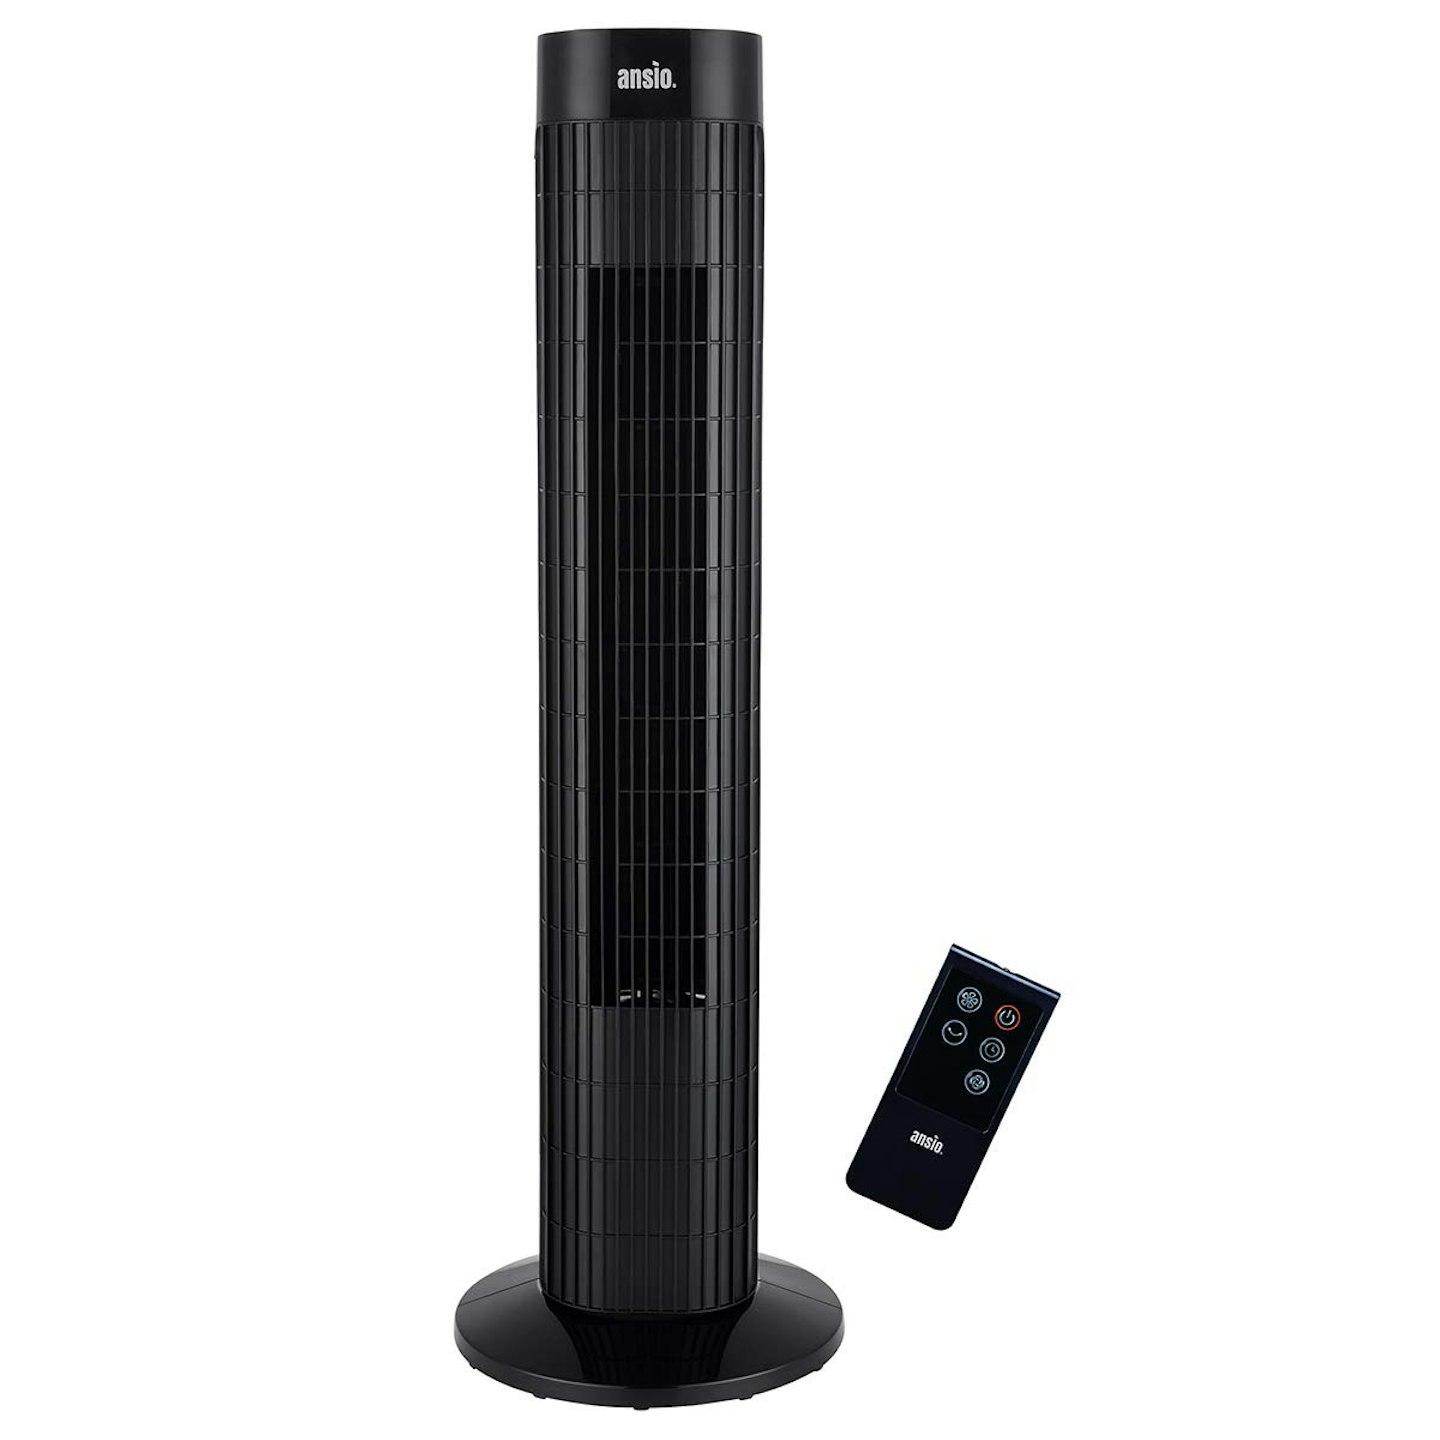 ANSIO Tower Fan 30-inch with Remote for Home and Office, 7.5 Hour Timer, 3 Speed Oscillating Cooling Fan